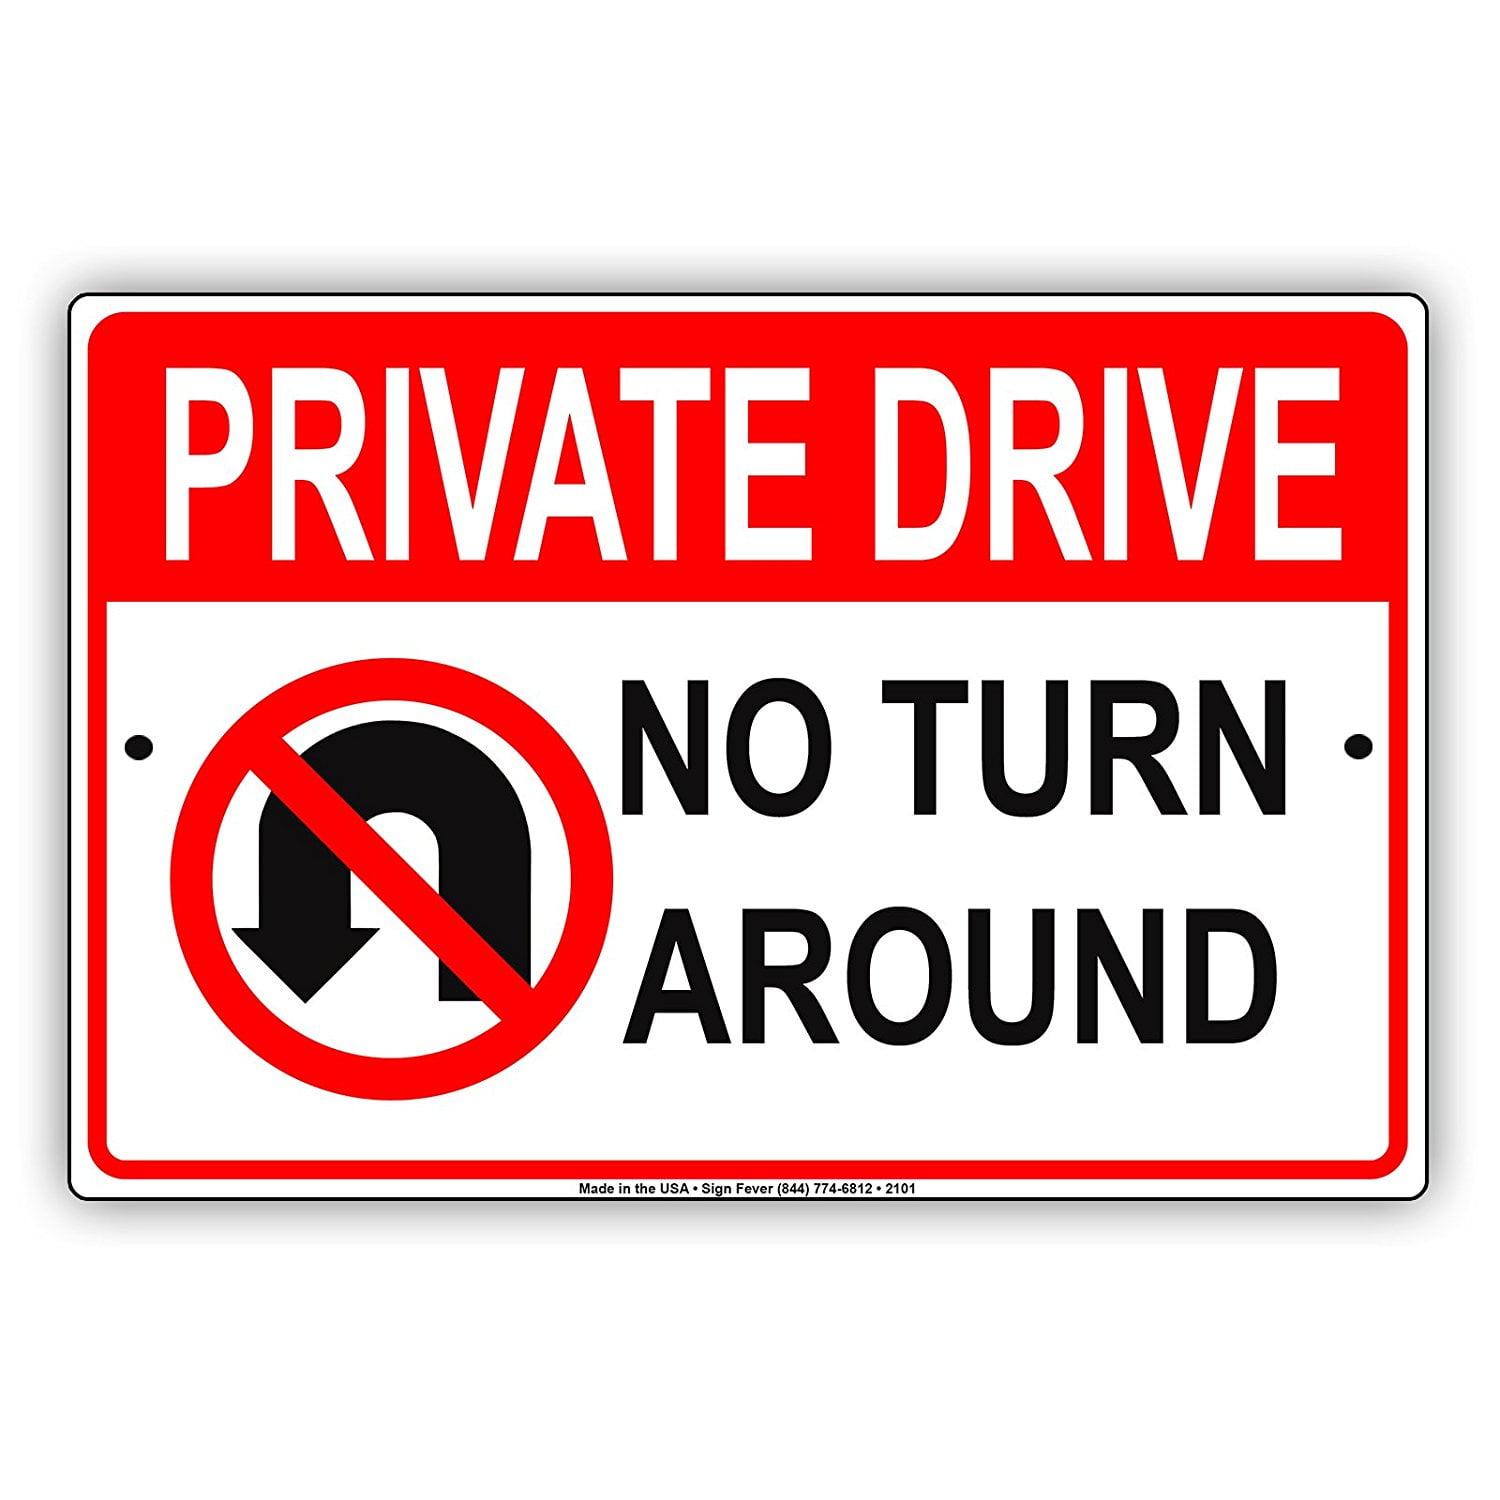 Private Drive No Turn Around Sign DURABLE WEATHER PROOF ALUMINUM SIGN 